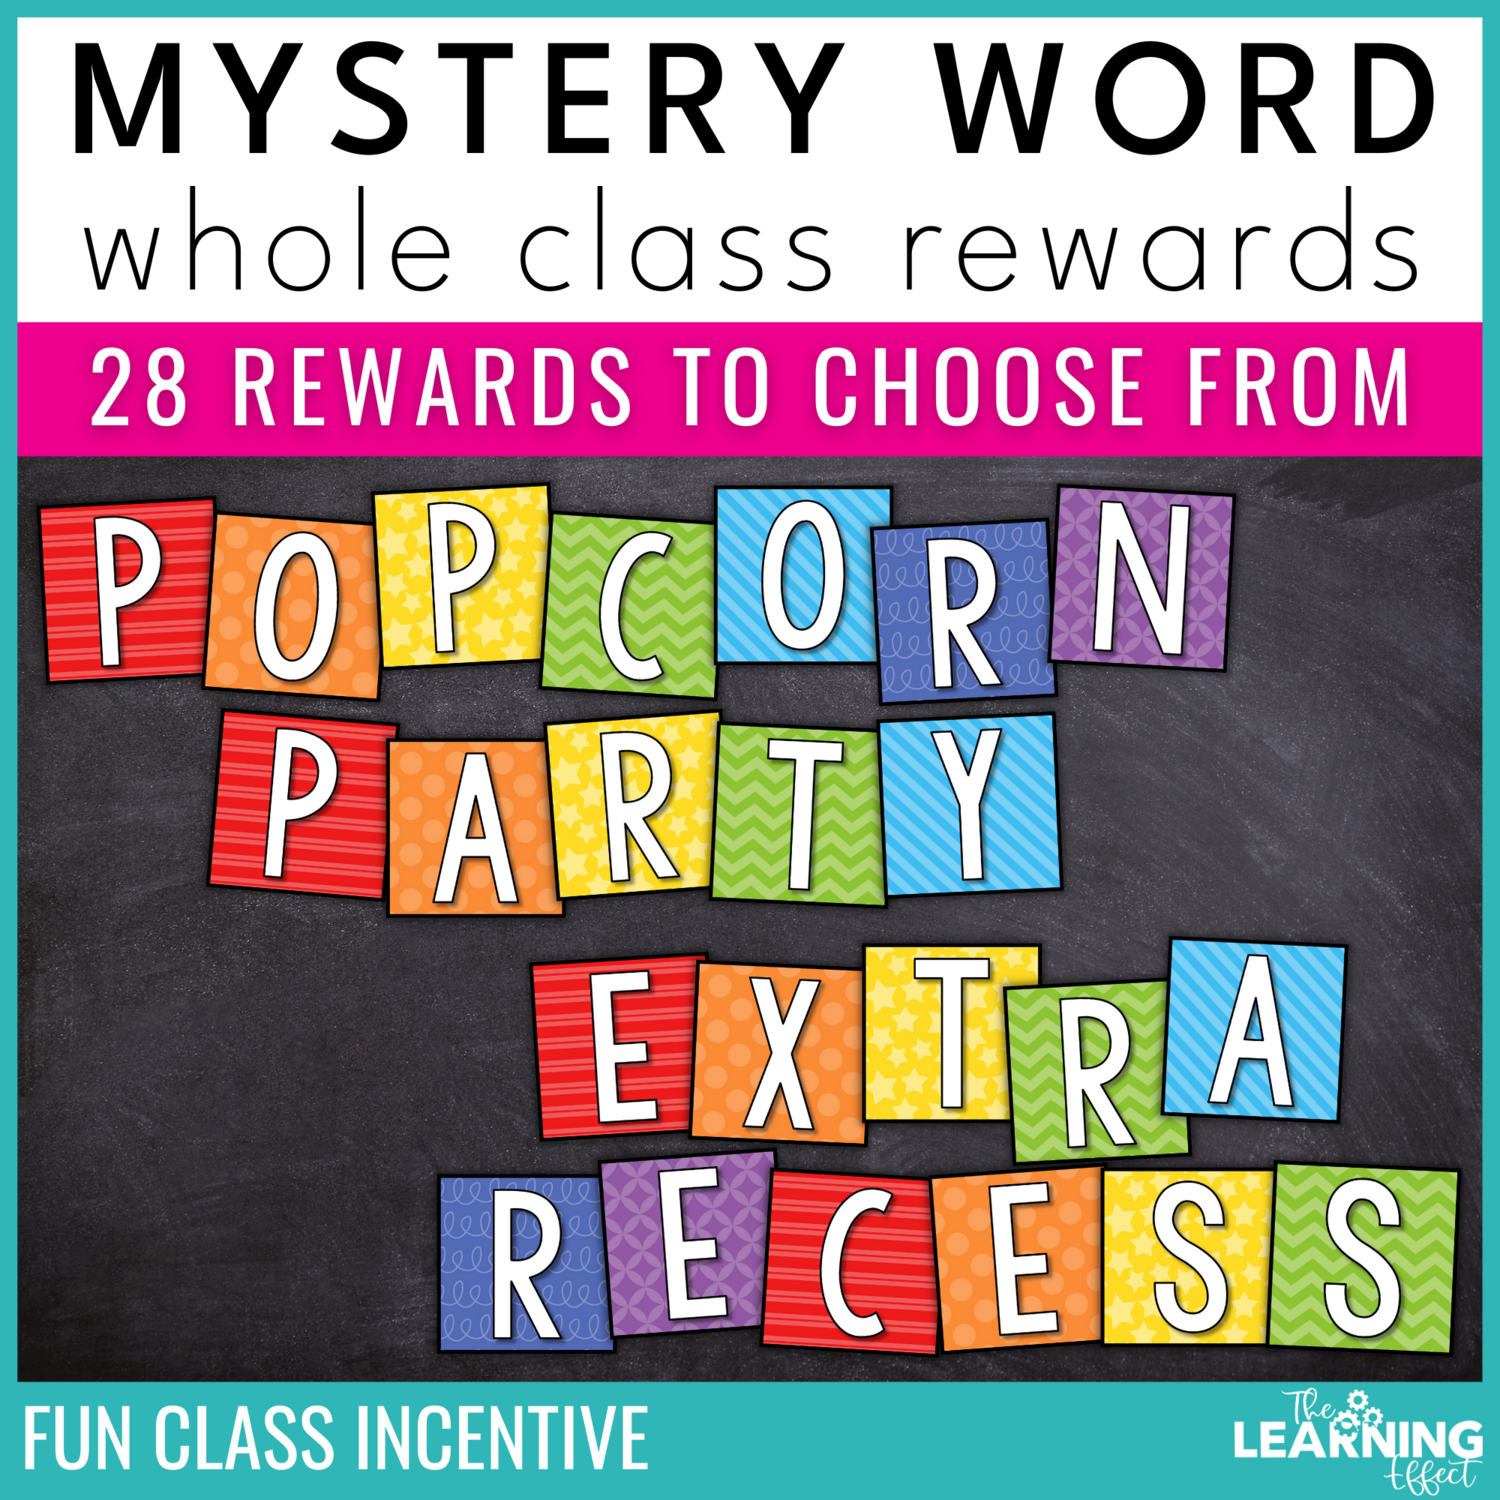 Whole Class Reward System | Mystery Word Classroom Behavior Management Incentive